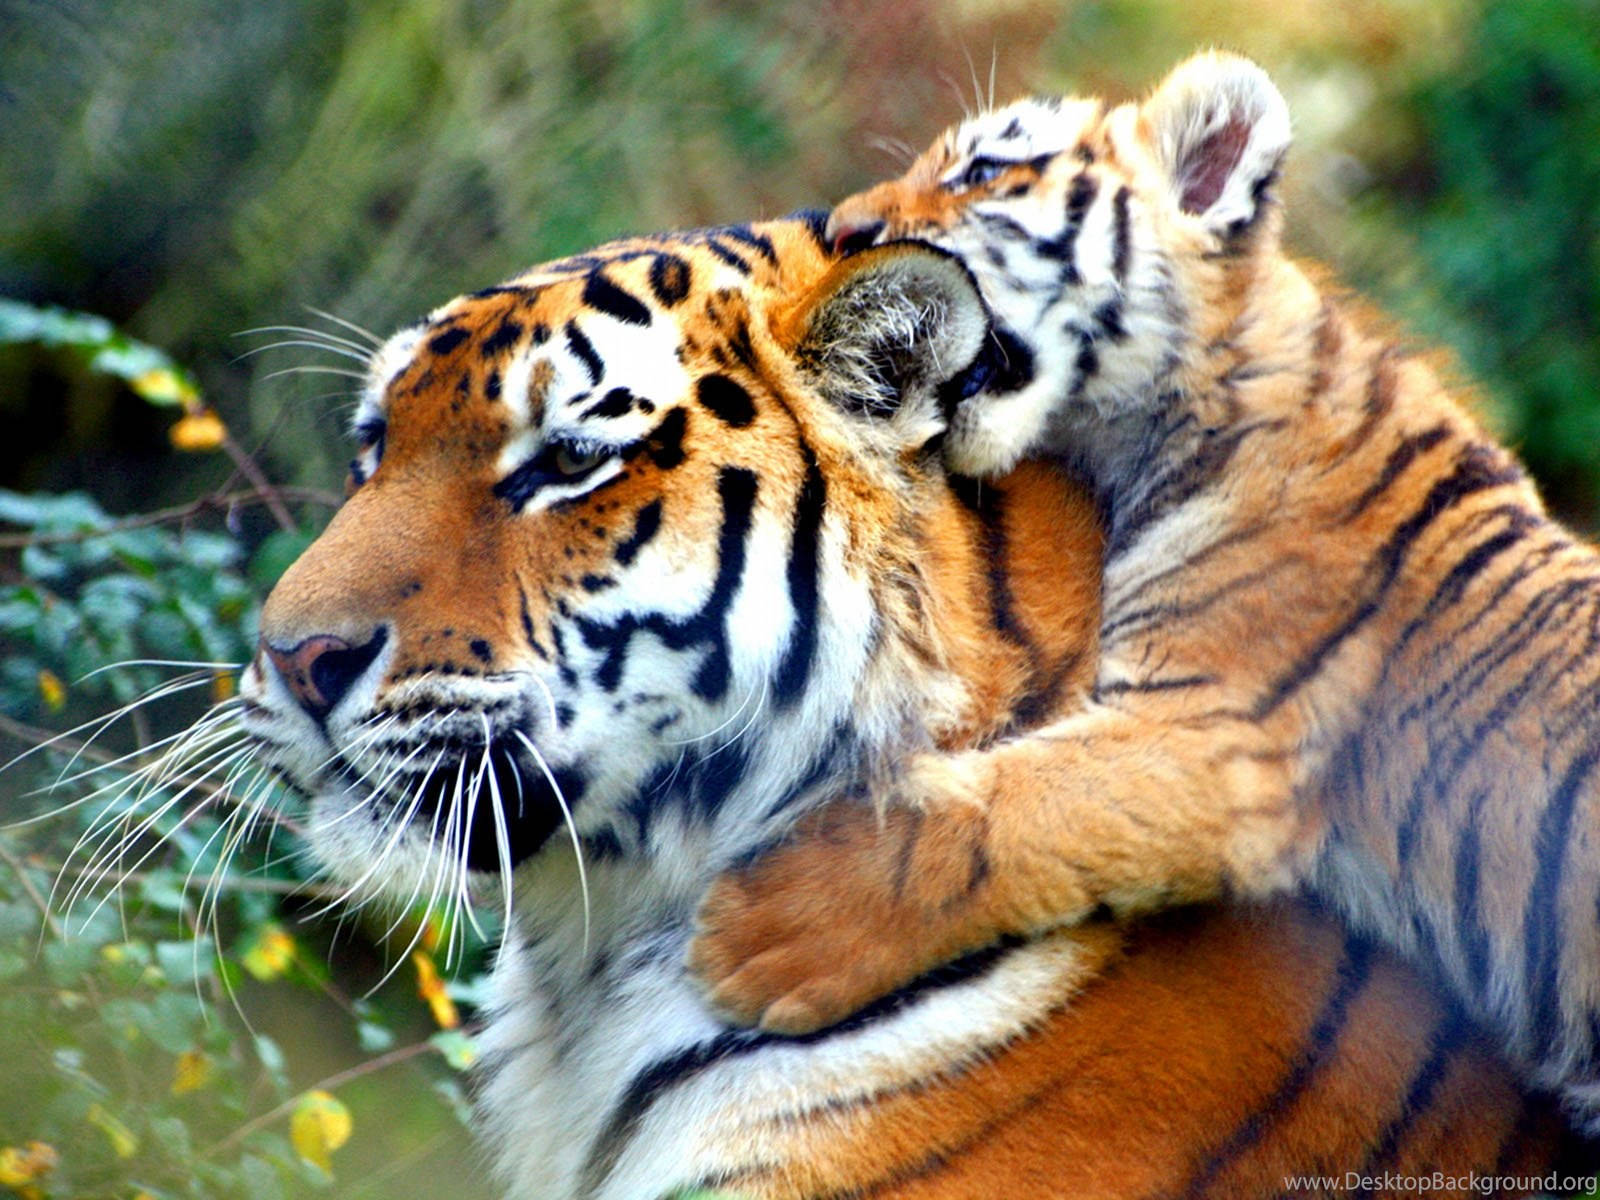 Baby Tiger And Mother Tiger